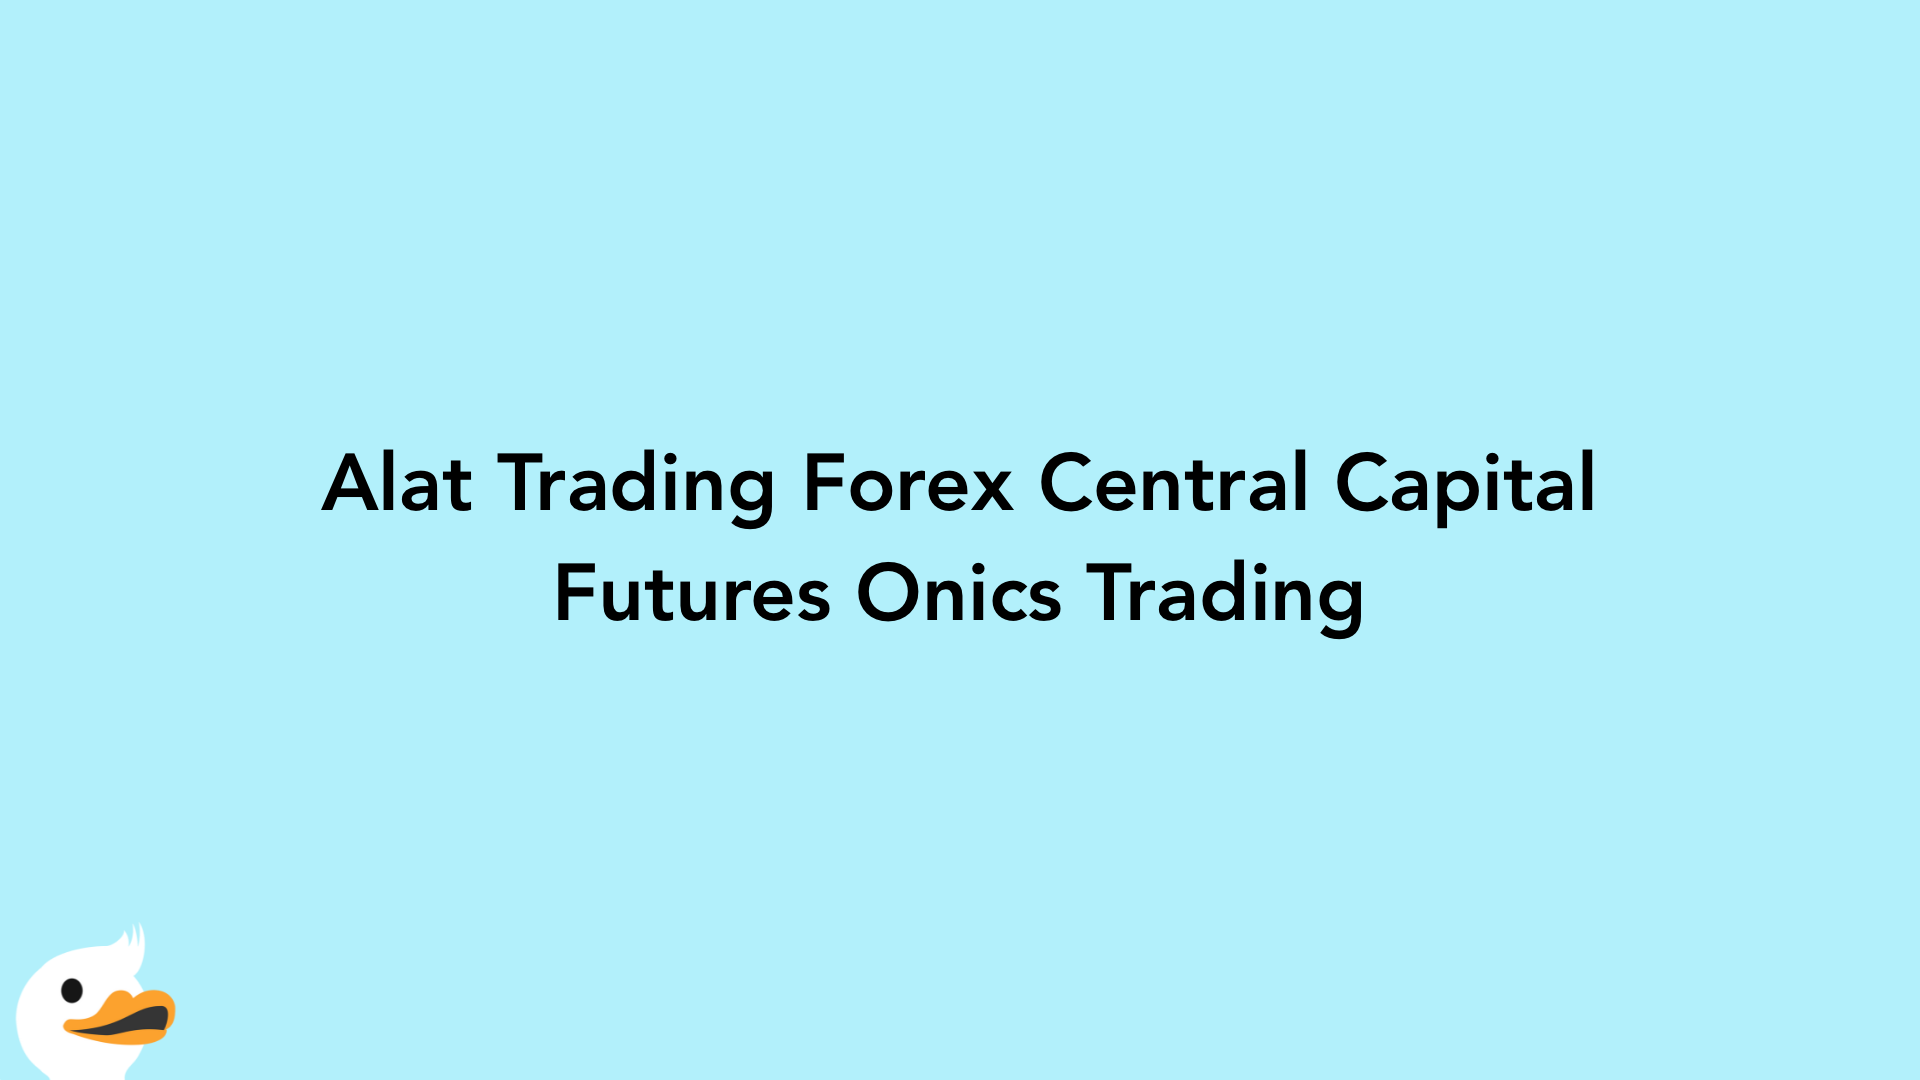 Alat Trading Forex Central Capital Futures Onics Trading